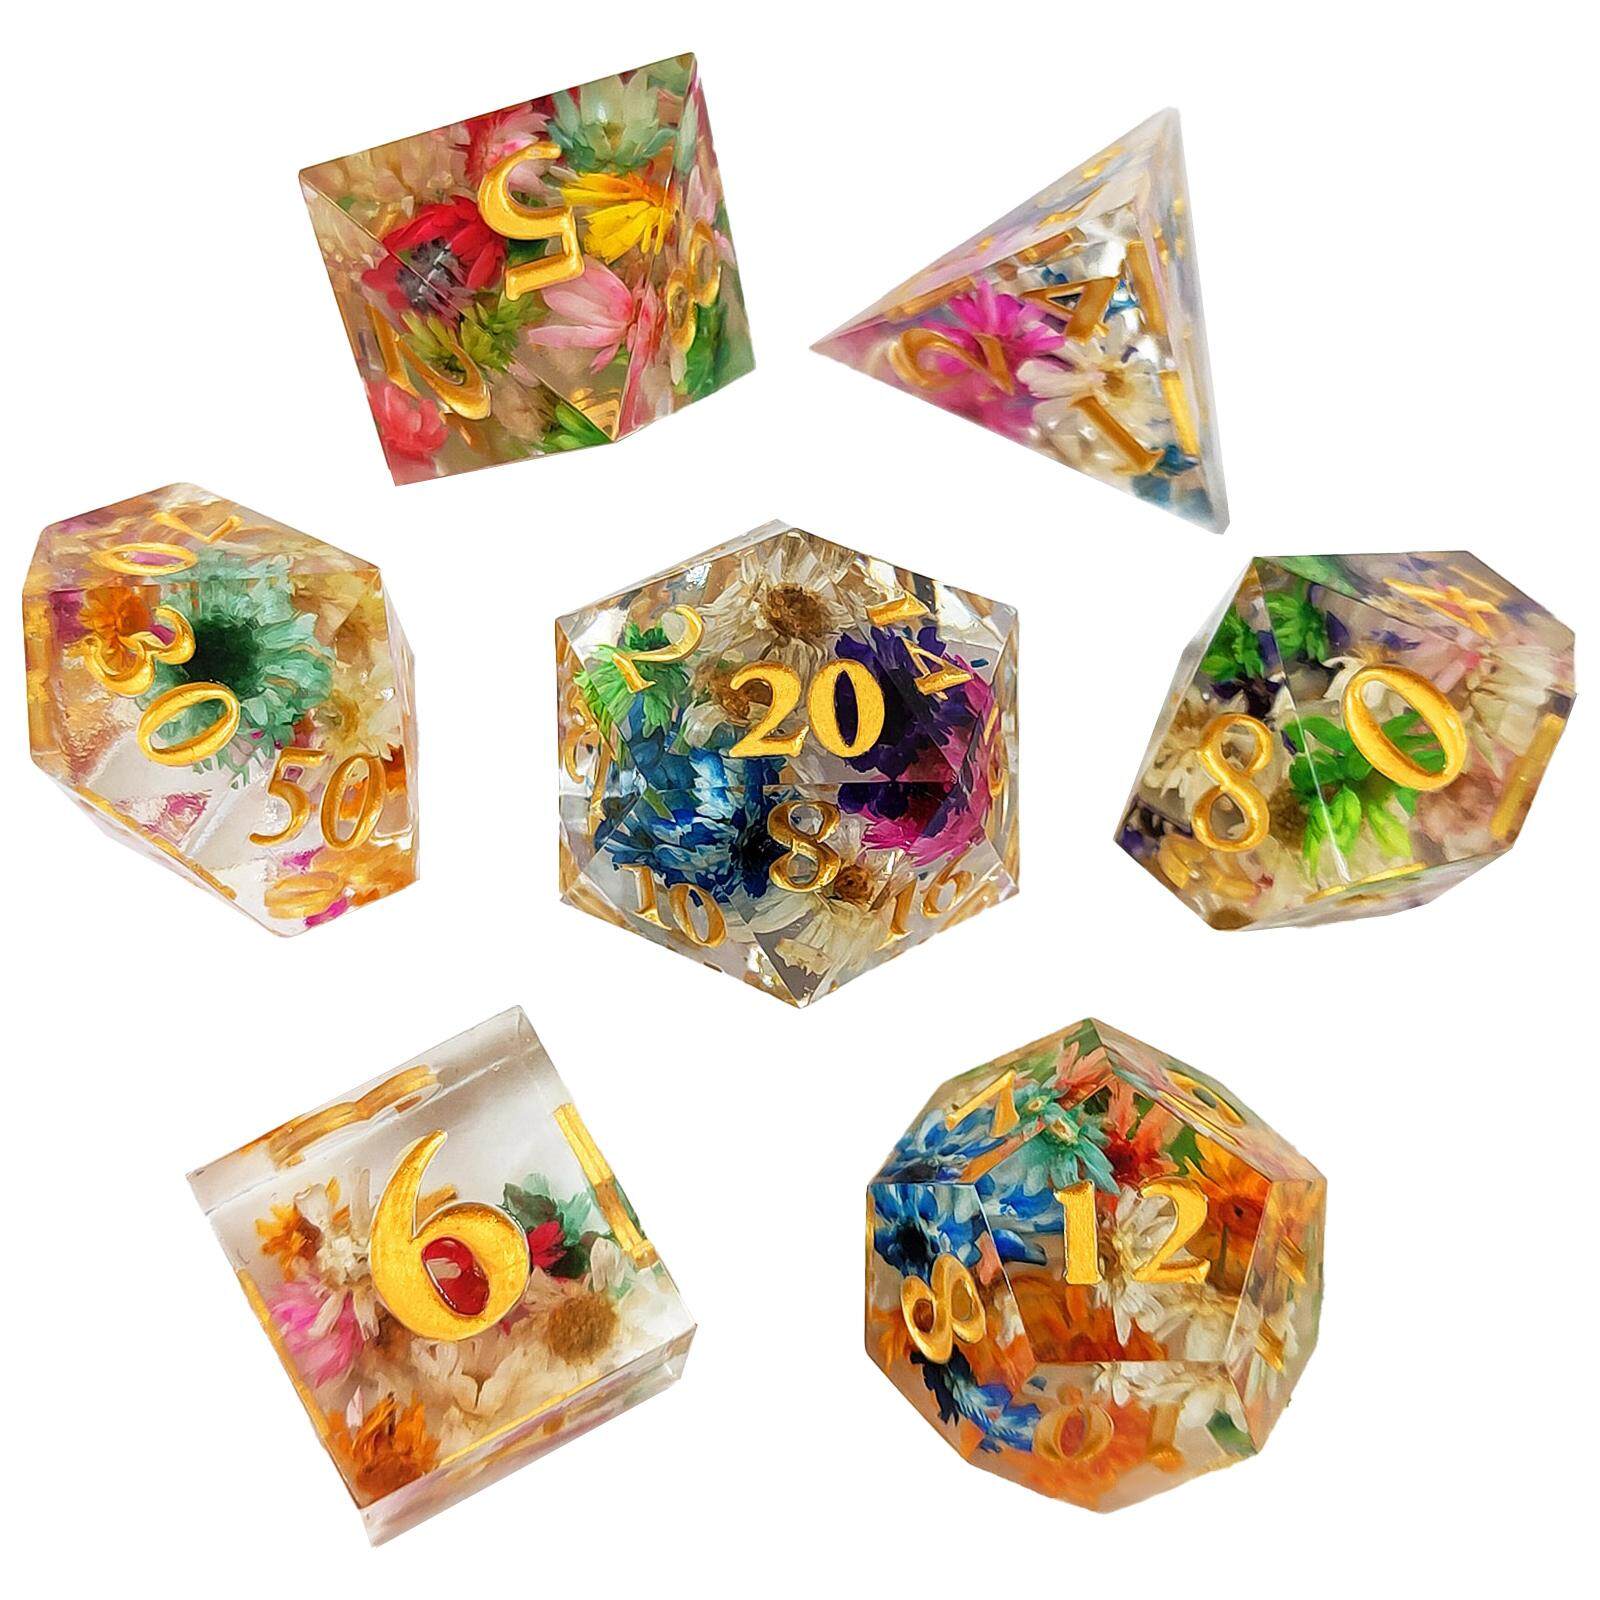 Engraved Polyhedral Dices Set Toys Durable Transparent Flower Acrylic Rolling Dices for Board Game Props Table Games Parties KTV